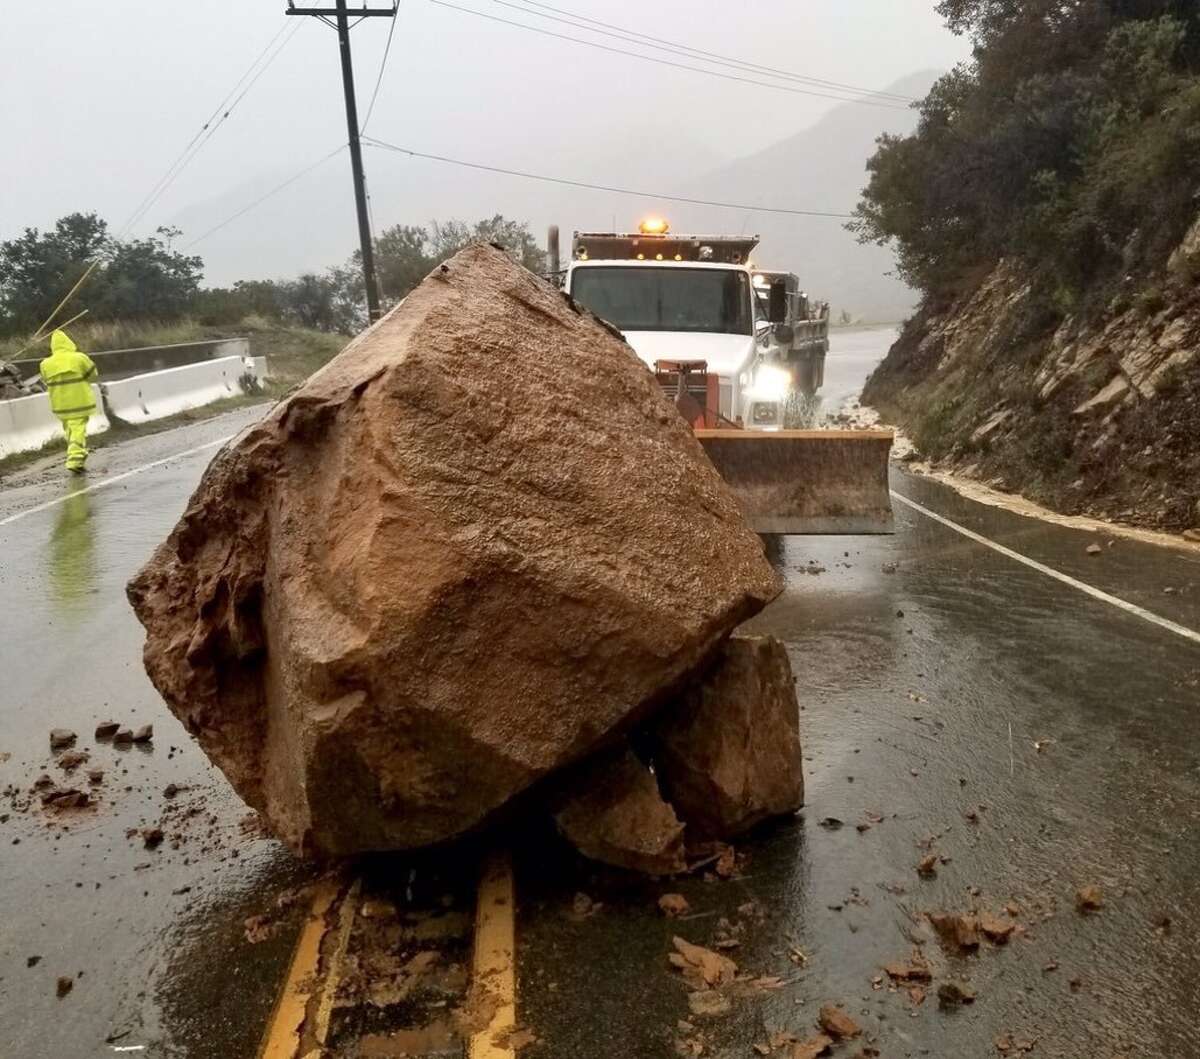 People in LA had some strong reactions when a major thunderstorm swept through the area on Thursday. CLICK THROUGH THE SLIDESHOW TO SEE MORE.